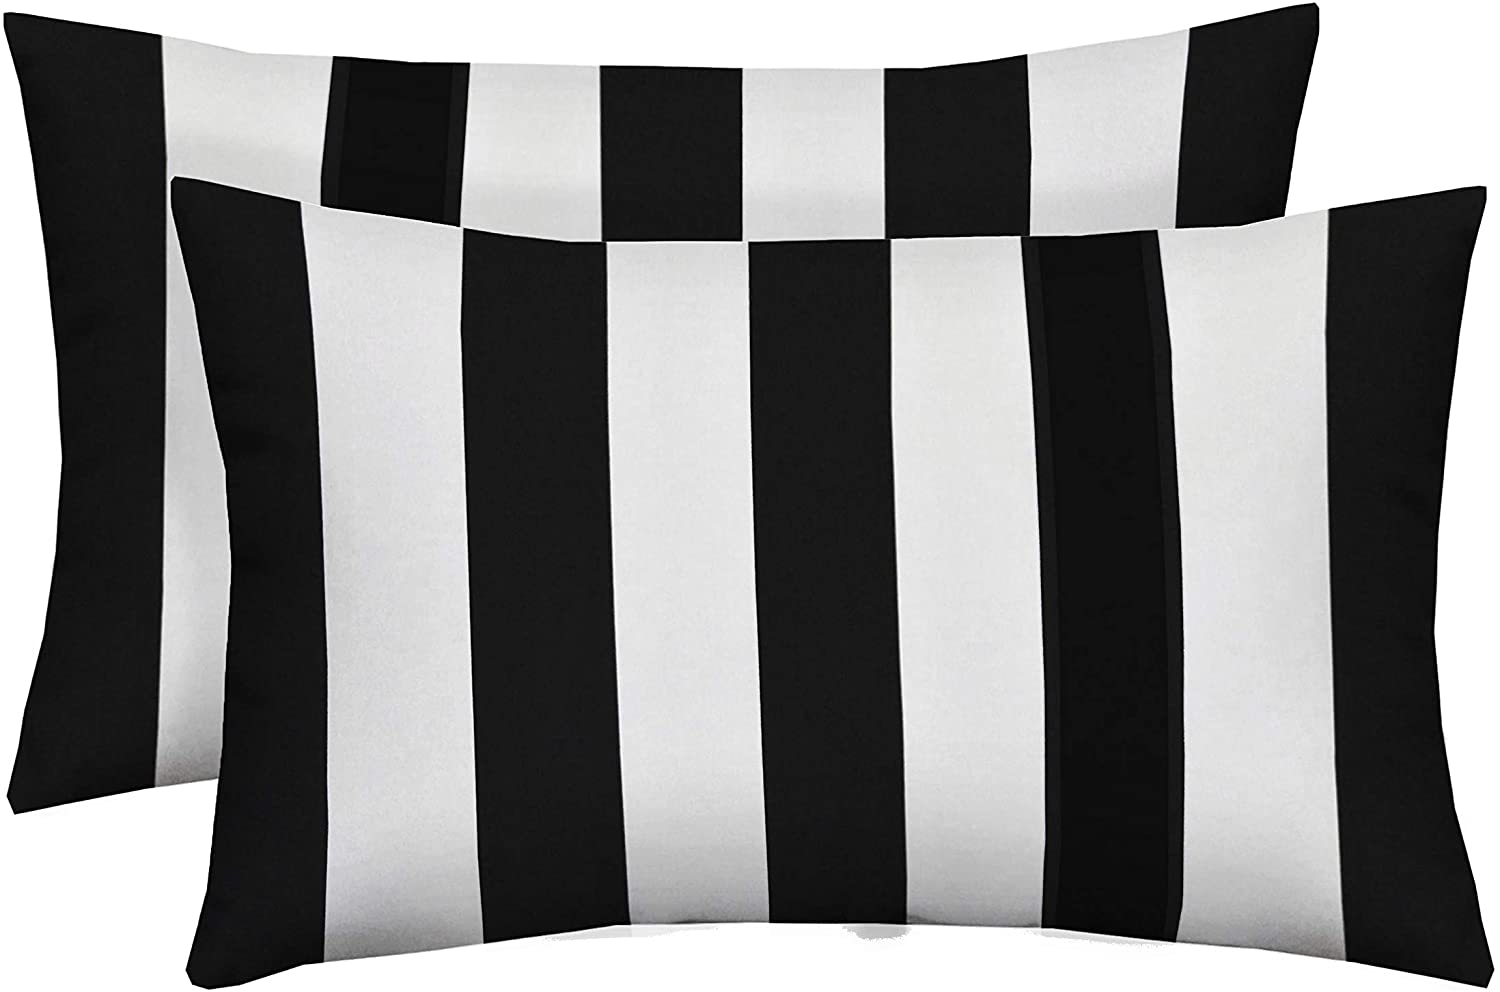 black and white outdoor pillows - HKMIU RSH Décor Set of 2 Indoor/Outdoor Decorative 